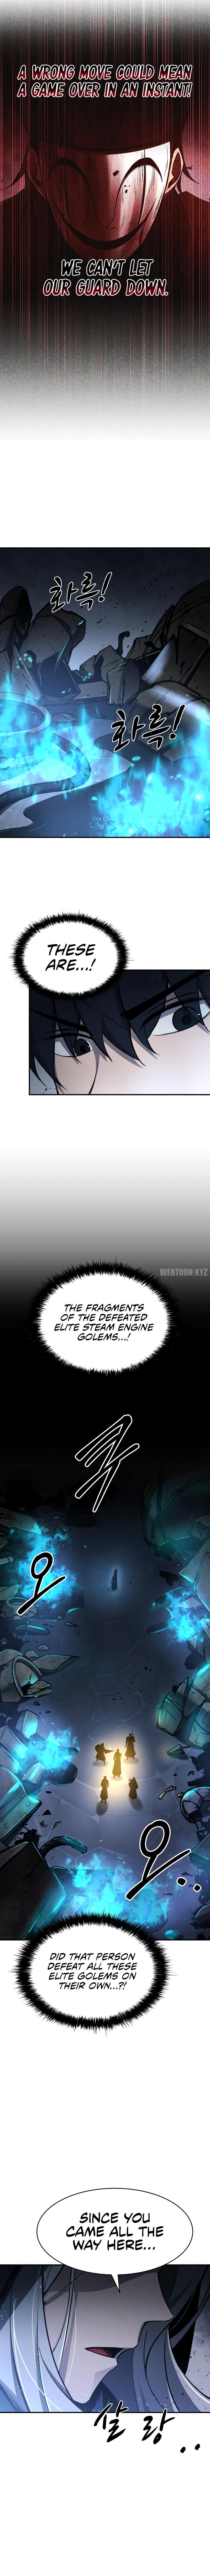 tyrant-of-the-tower-defense-game-chap-39-18